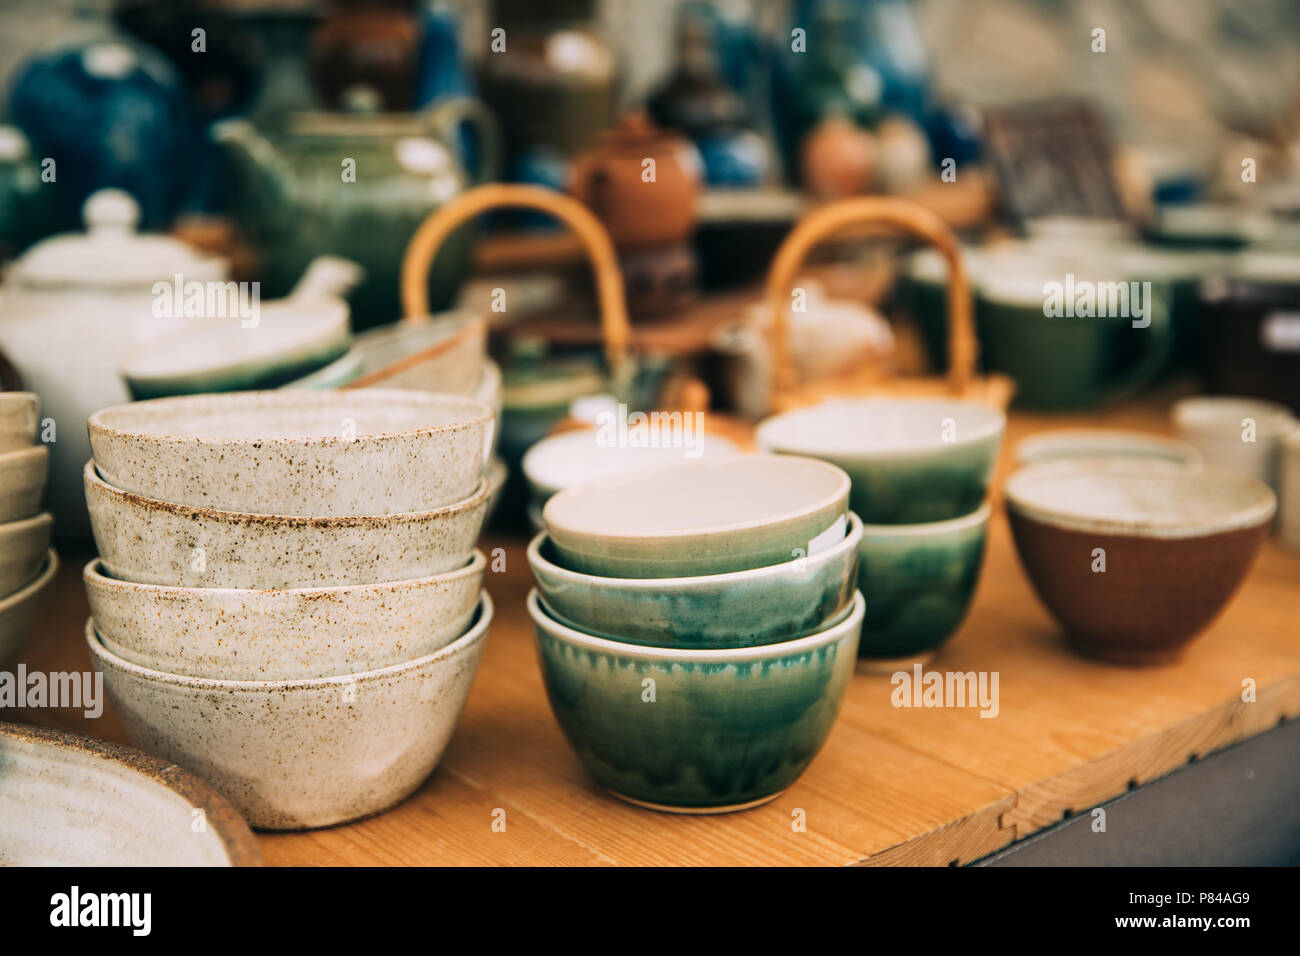 Ceramic Clay Crafts. Ceramic Dishware In Market. Bowls Of Different Sizes, Colors And Shapes. Stock Photo